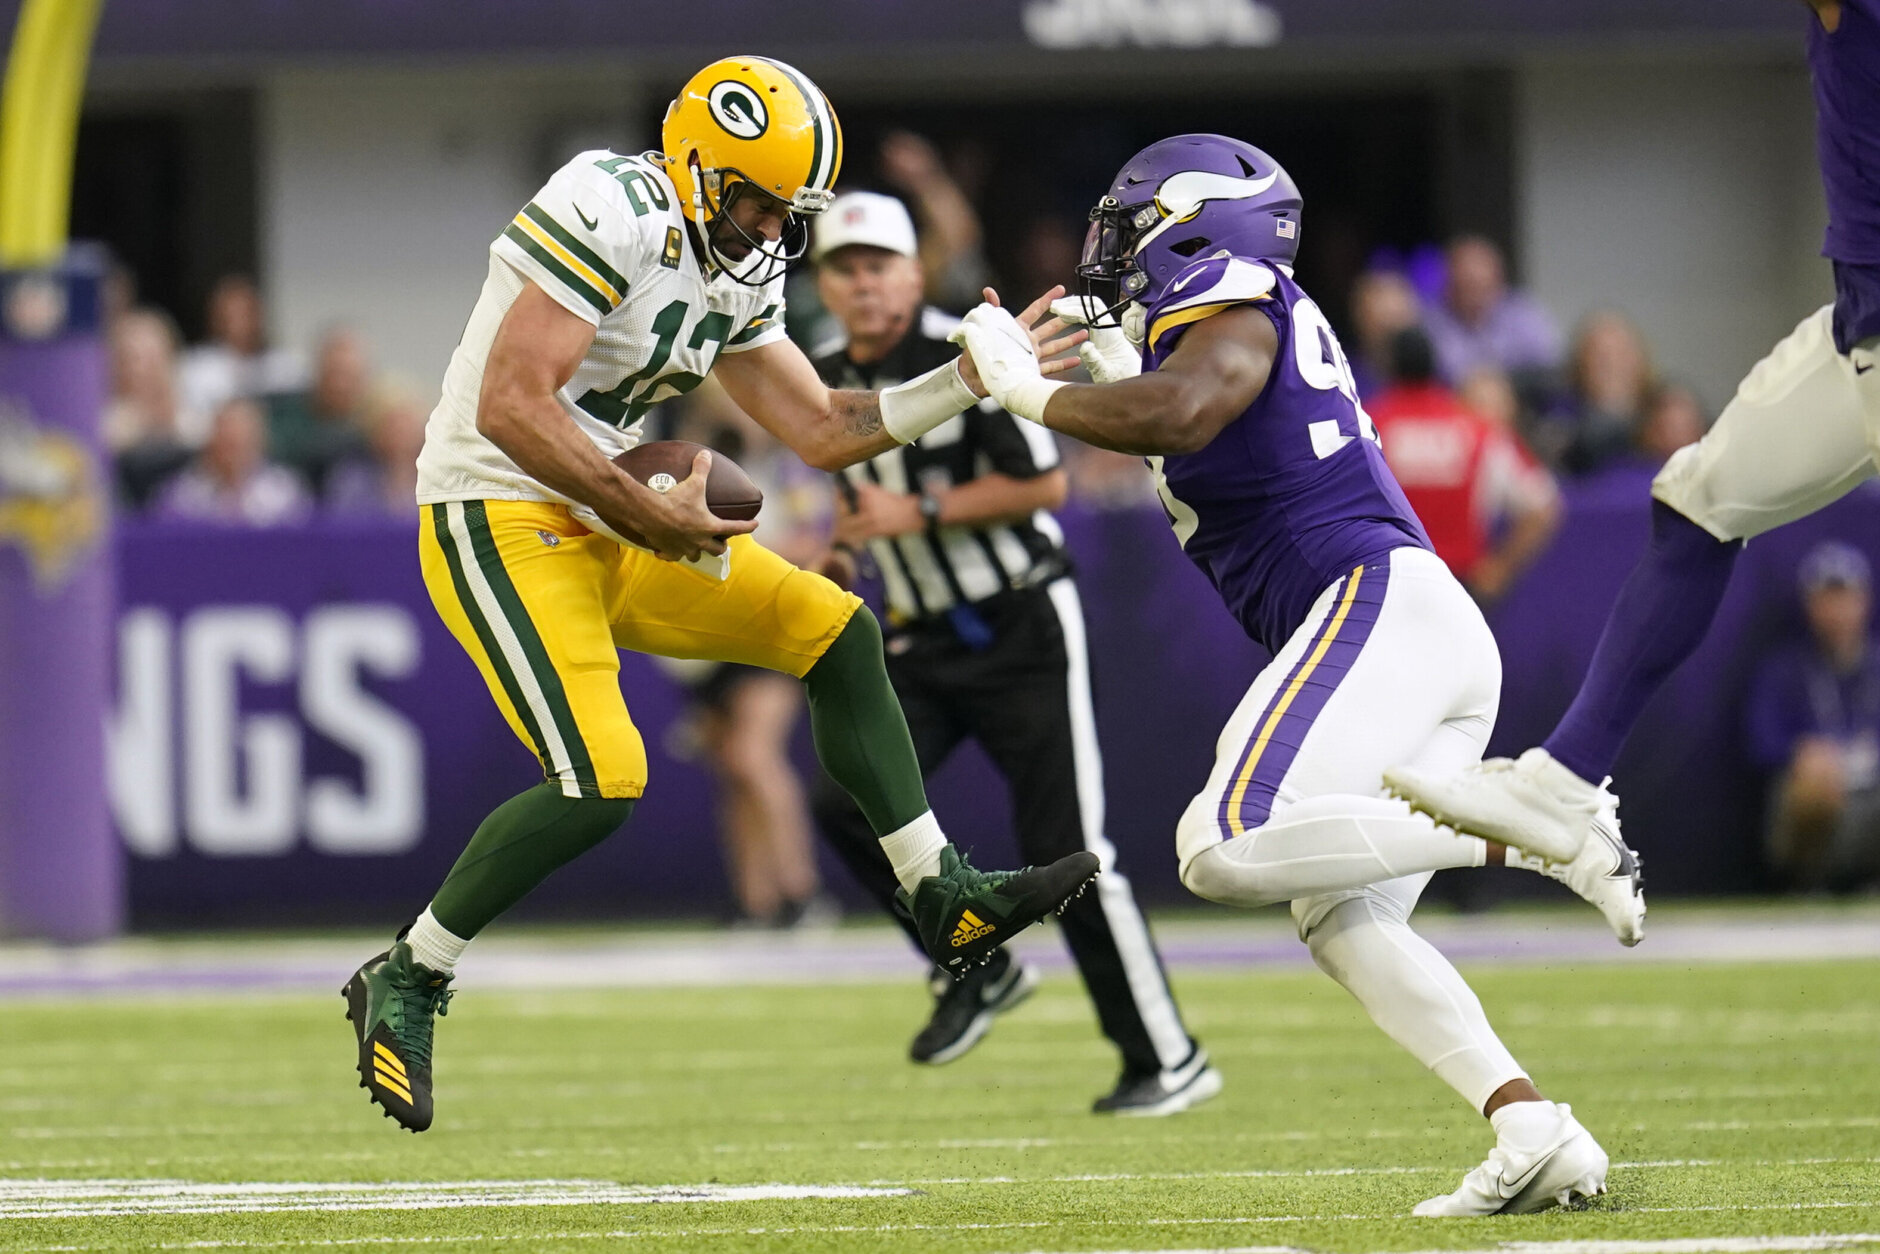 <p><b><i>Packers 7</i></b><br />
<b><i>Vikings 23</i></b></p>
<p>Look, Aaron Rodgers was playing without his starting tackles and perhaps his best receiver. So I don&#8217;t want to overblow this result (especially considering they lost way worse to start last season), but throwing his first pick against a division opponent since 2020, and getting held without a touchdown and under 200 passing yards, shows Green Bay could be in for a loooong season.</p>
<p>It also shows that Minnesota might be poised to steal the NFC North sooner rather than later. If Justin Jefferson can replicate Sunday&#8217;s monster game in prime-time in Philadelphia Week 2, I might just have to change my thinking about the Vikings.</p>
<blockquote class="twitter-tweet tw-align-center">
<p dir="ltr" lang="en">Justin Jefferson now has 5 career games with 150 receiving yards.</p>
<p>The only player with more 150-yard receiving games at age 23 or younger in NFL history? Randy Moss (6). <a href="https://t.co/BYYMcX2sDQ">pic.twitter.com/BYYMcX2sDQ</a></p>
<p>— ESPN Stats &amp; Info (@ESPNStatsInfo) <a href="https://twitter.com/ESPNStatsInfo/status/1569102313477767169?ref_src=twsrc%5Etfw">September 11, 2022</a></p></blockquote>
<p><script async src="https://platform.twitter.com/widgets.js" charset="utf-8"></script></p>
